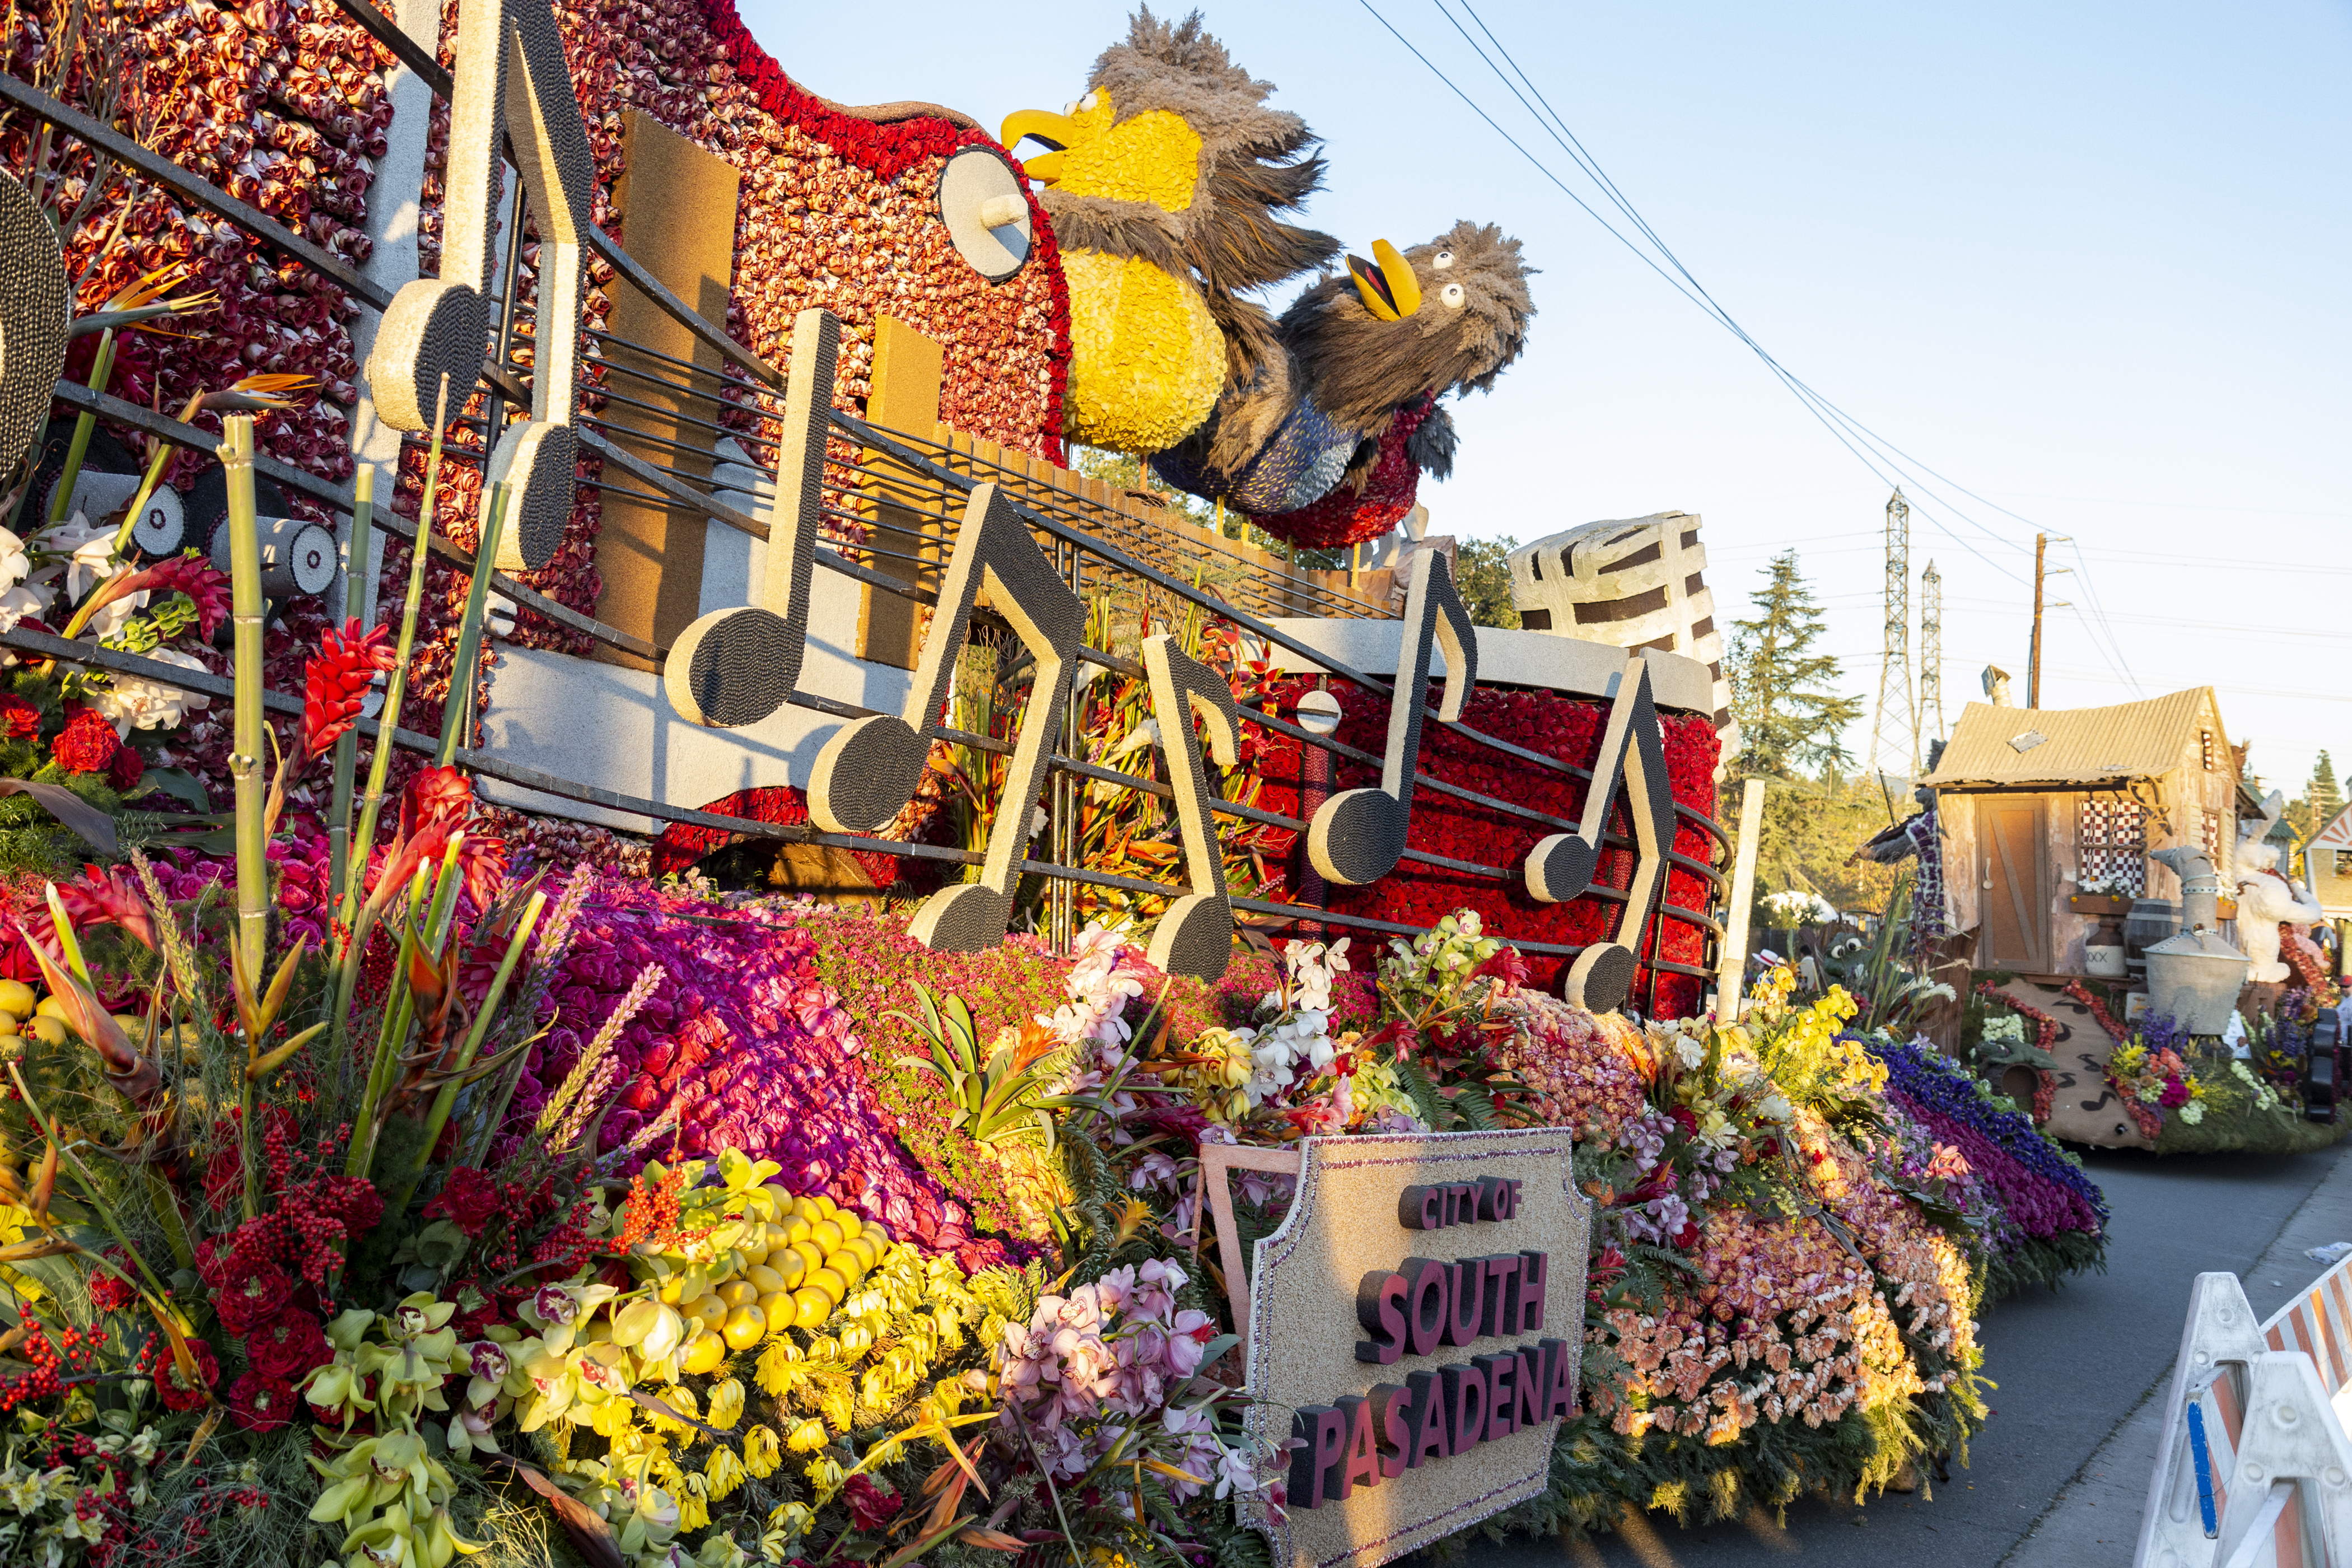 Thumbnail for South Pasadena’s Mayor Award Rose Parade float cut out of live coverage after small fire on preceding float